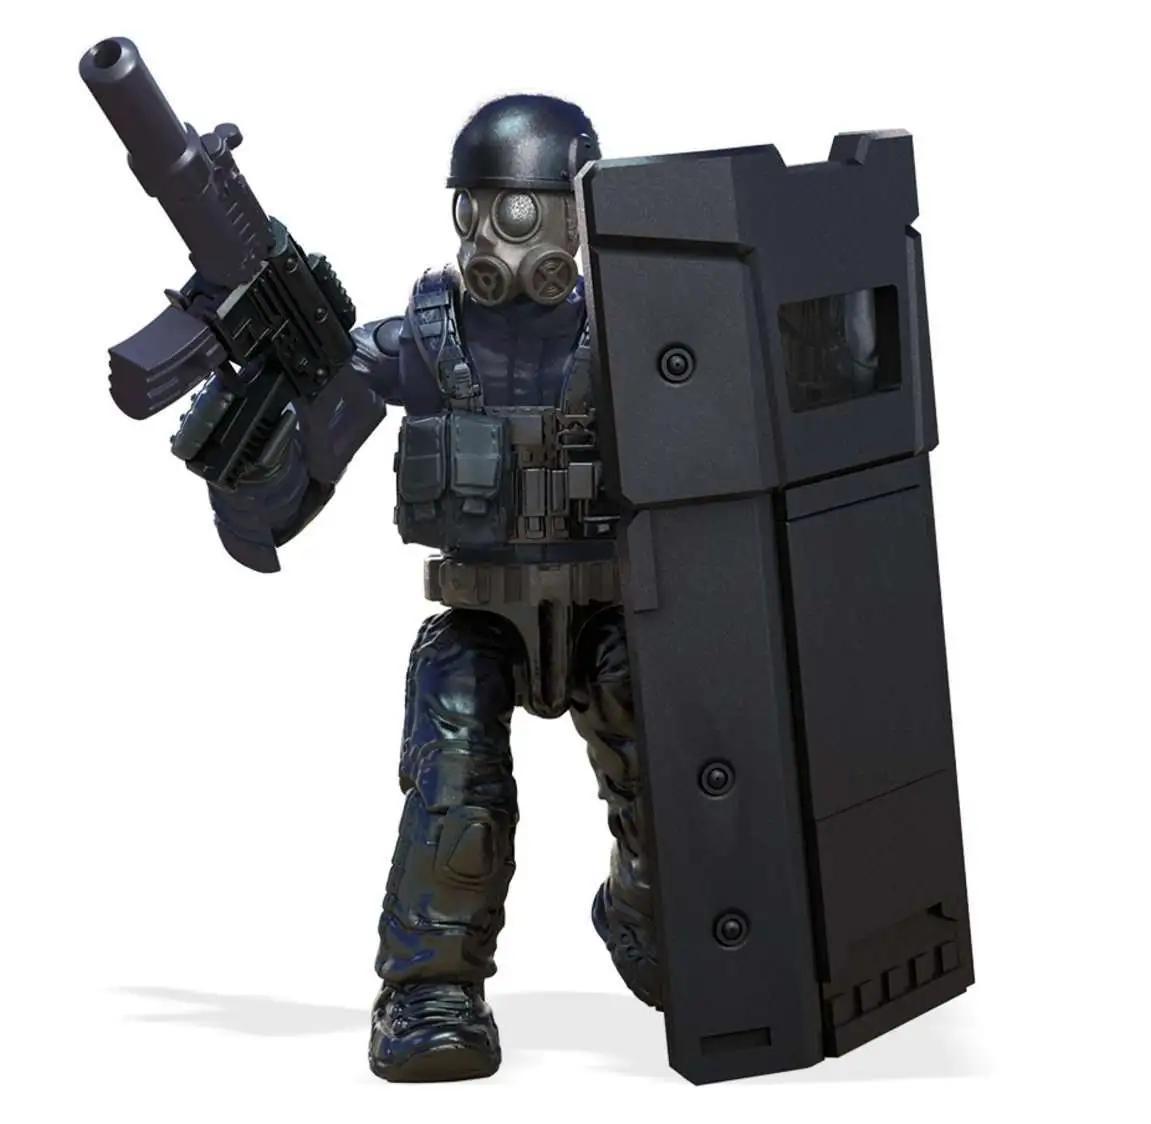 FIGURES #2 & 4 & EMP WEAPON From Call of Duty COD Mega FMG14 URBAN STRIKE SQUAD 